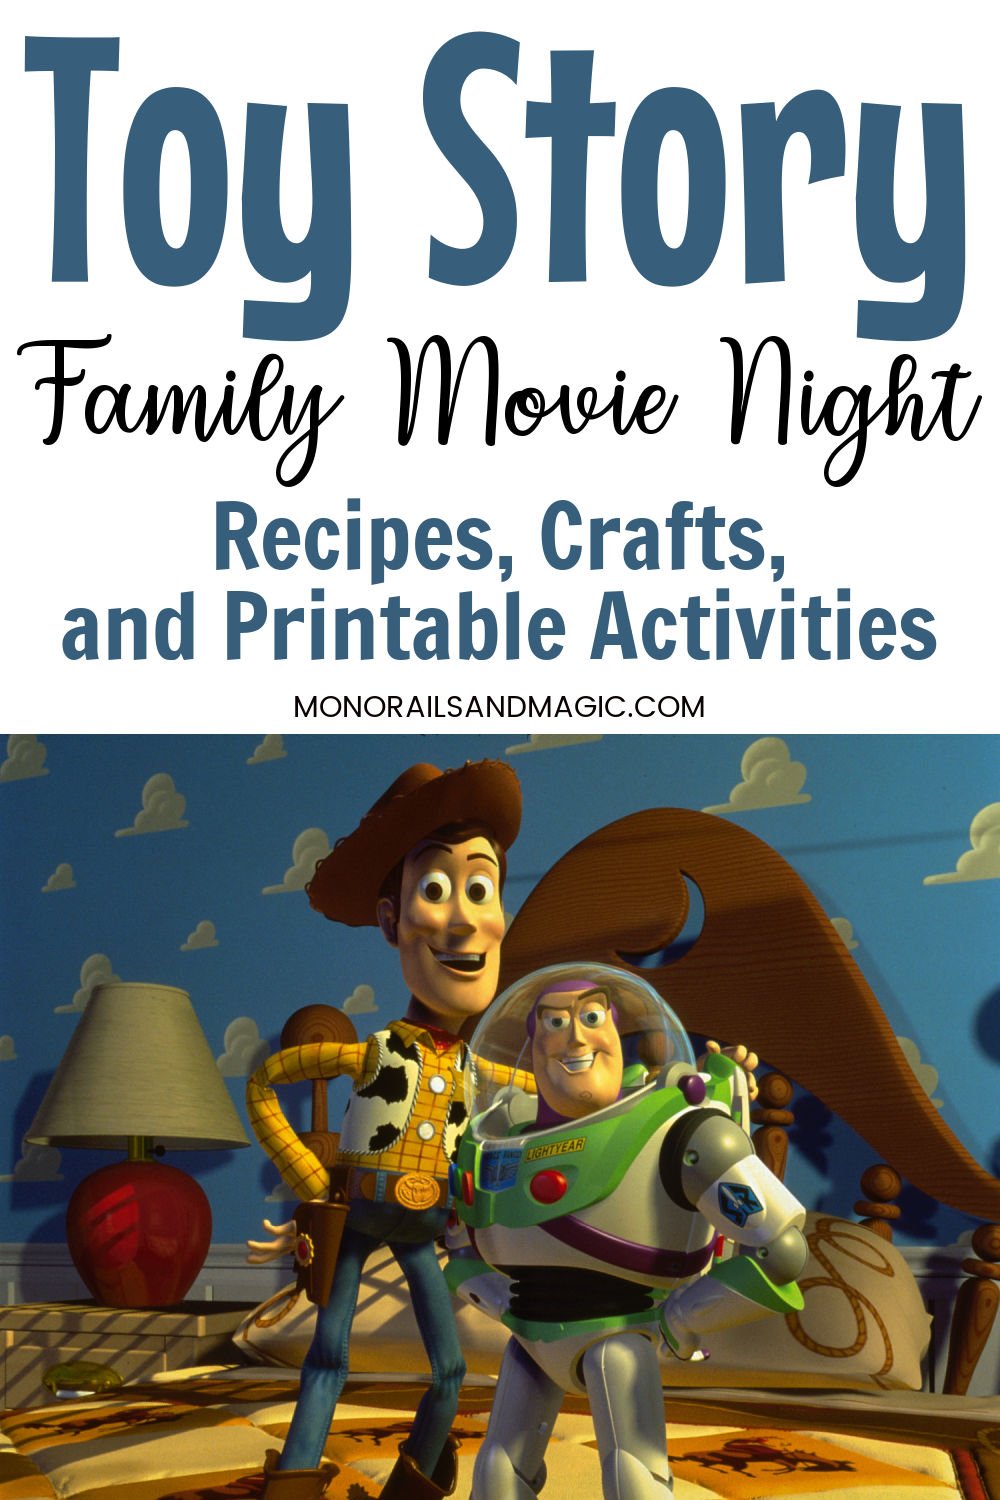 Recipe, craft, and printable ideas for a Toy Story family movie night.